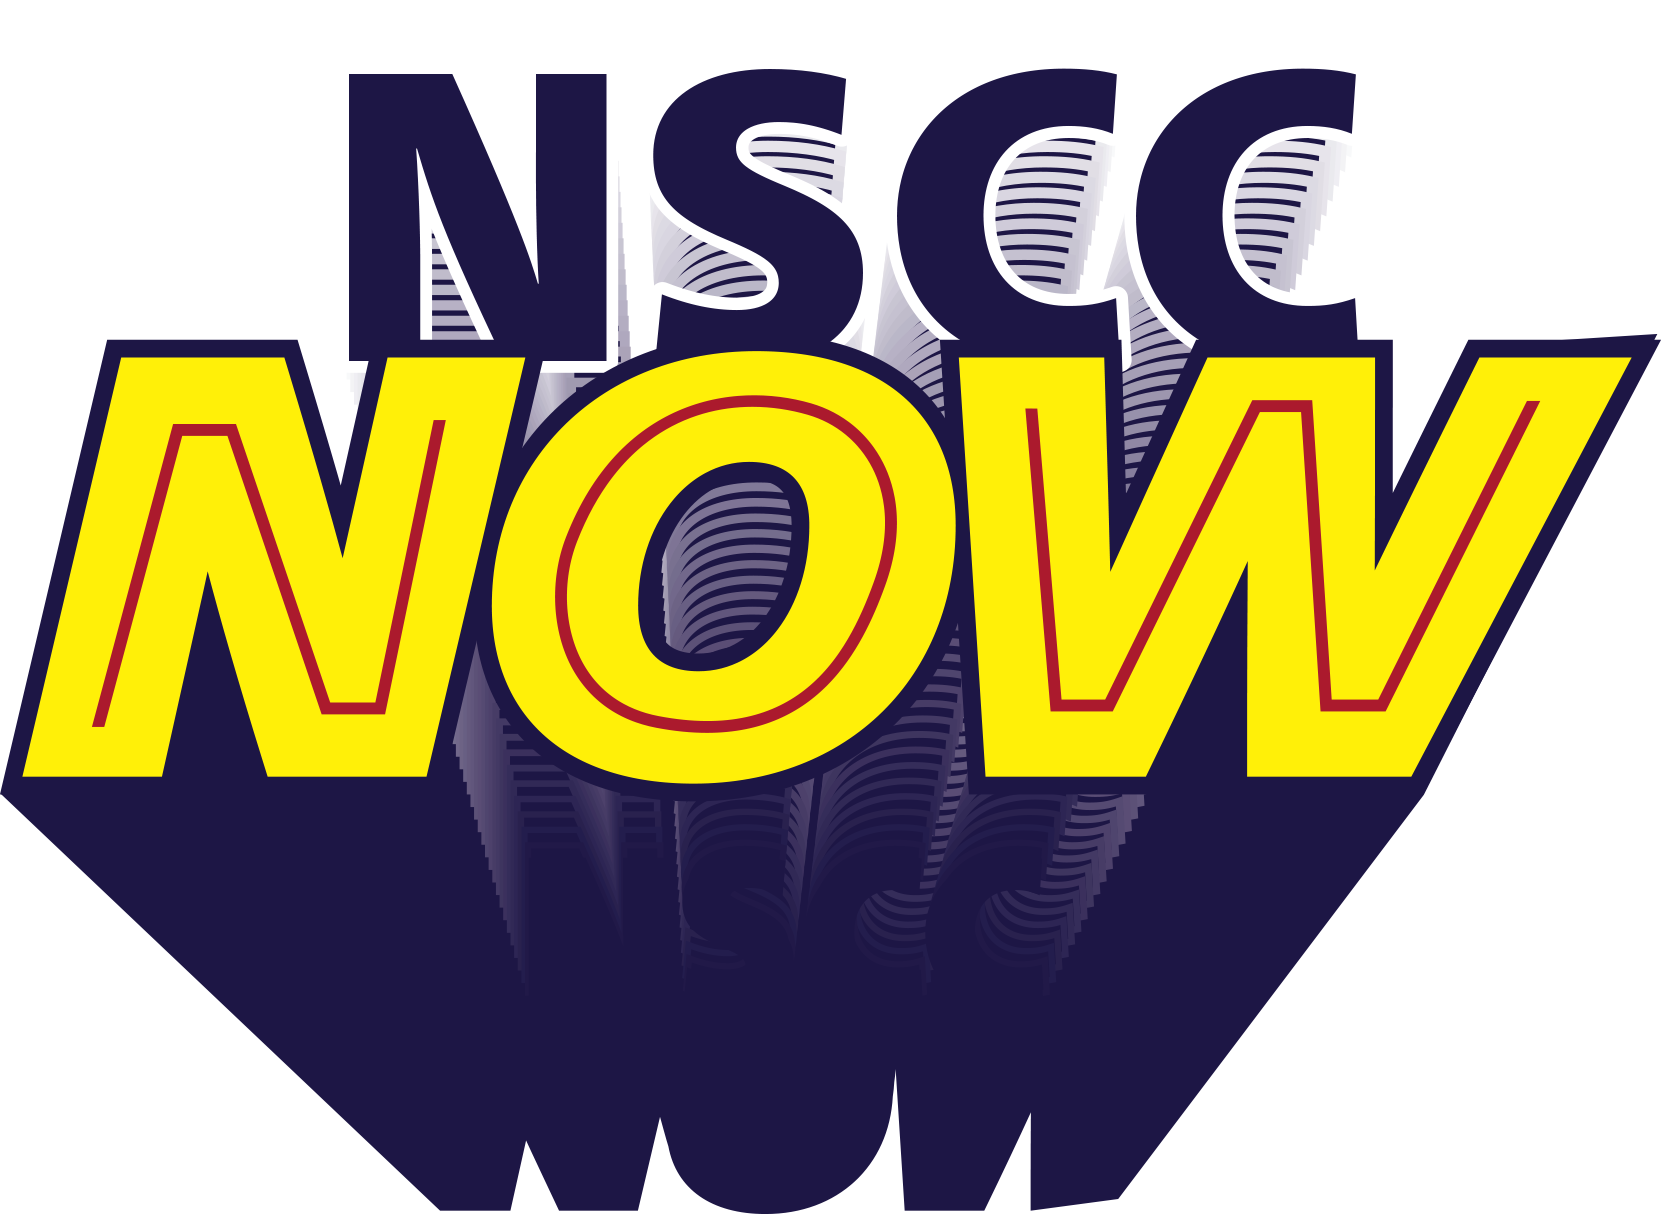 NSCC NOW, Achieve, Learn & Persist